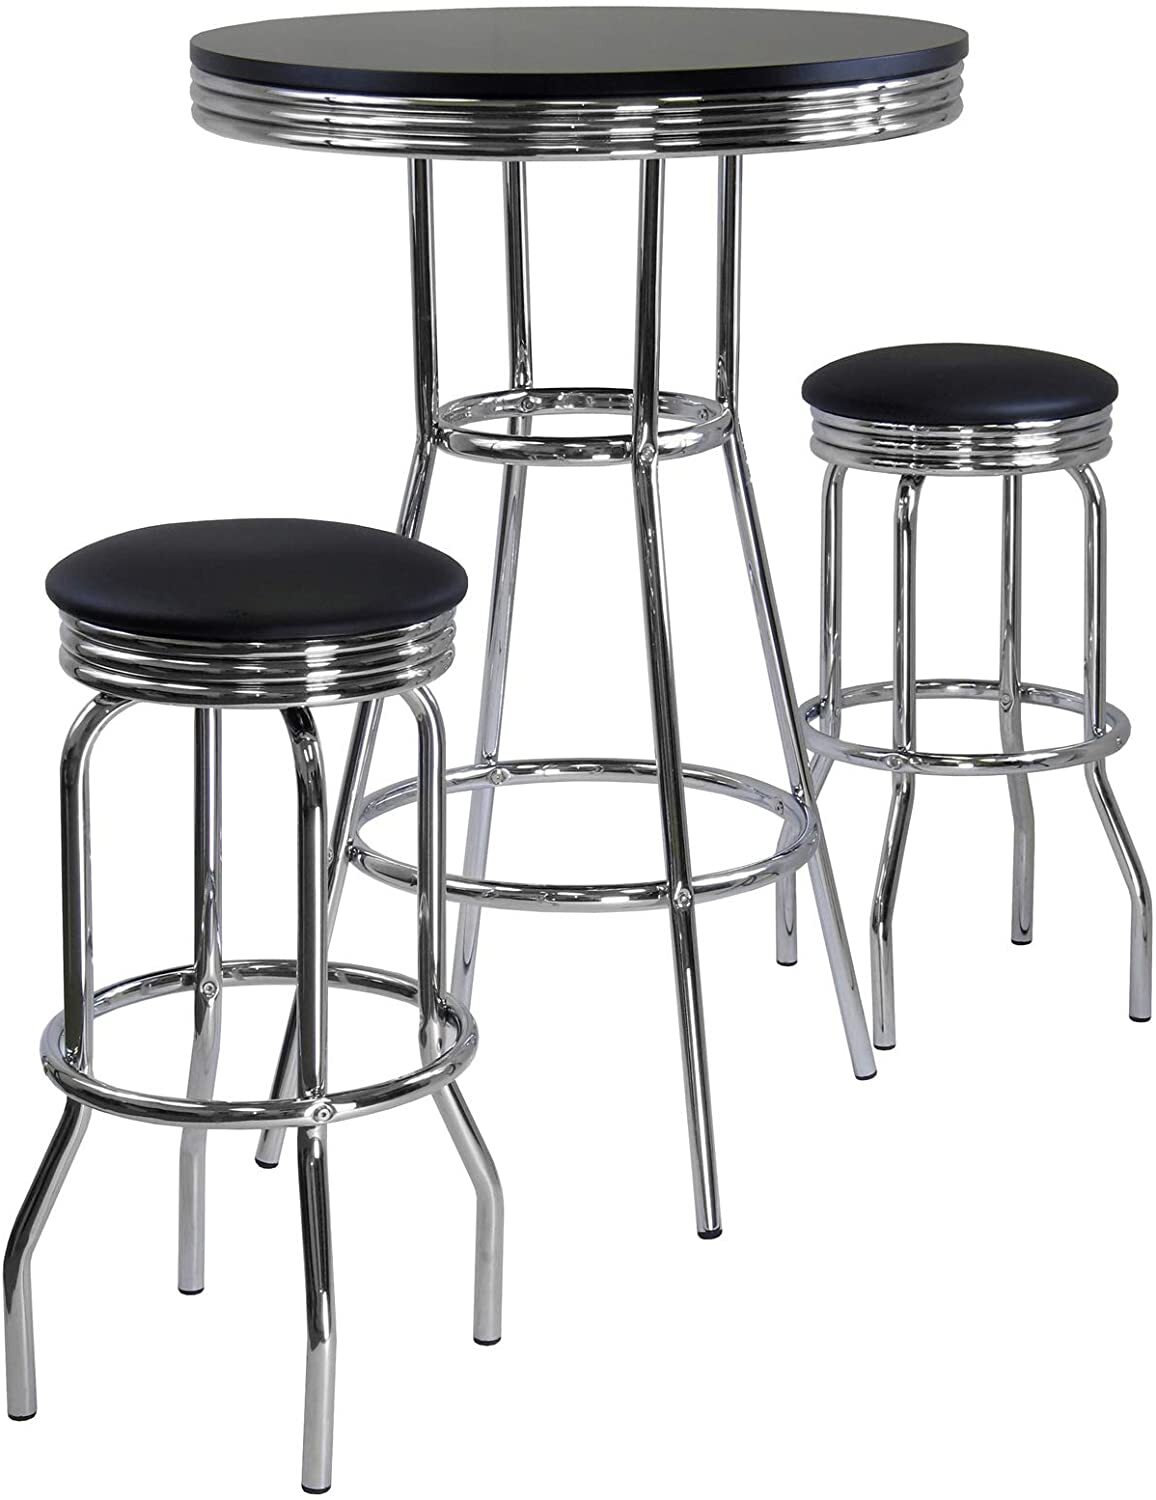 Retro tall table and chairs for cocktail hour